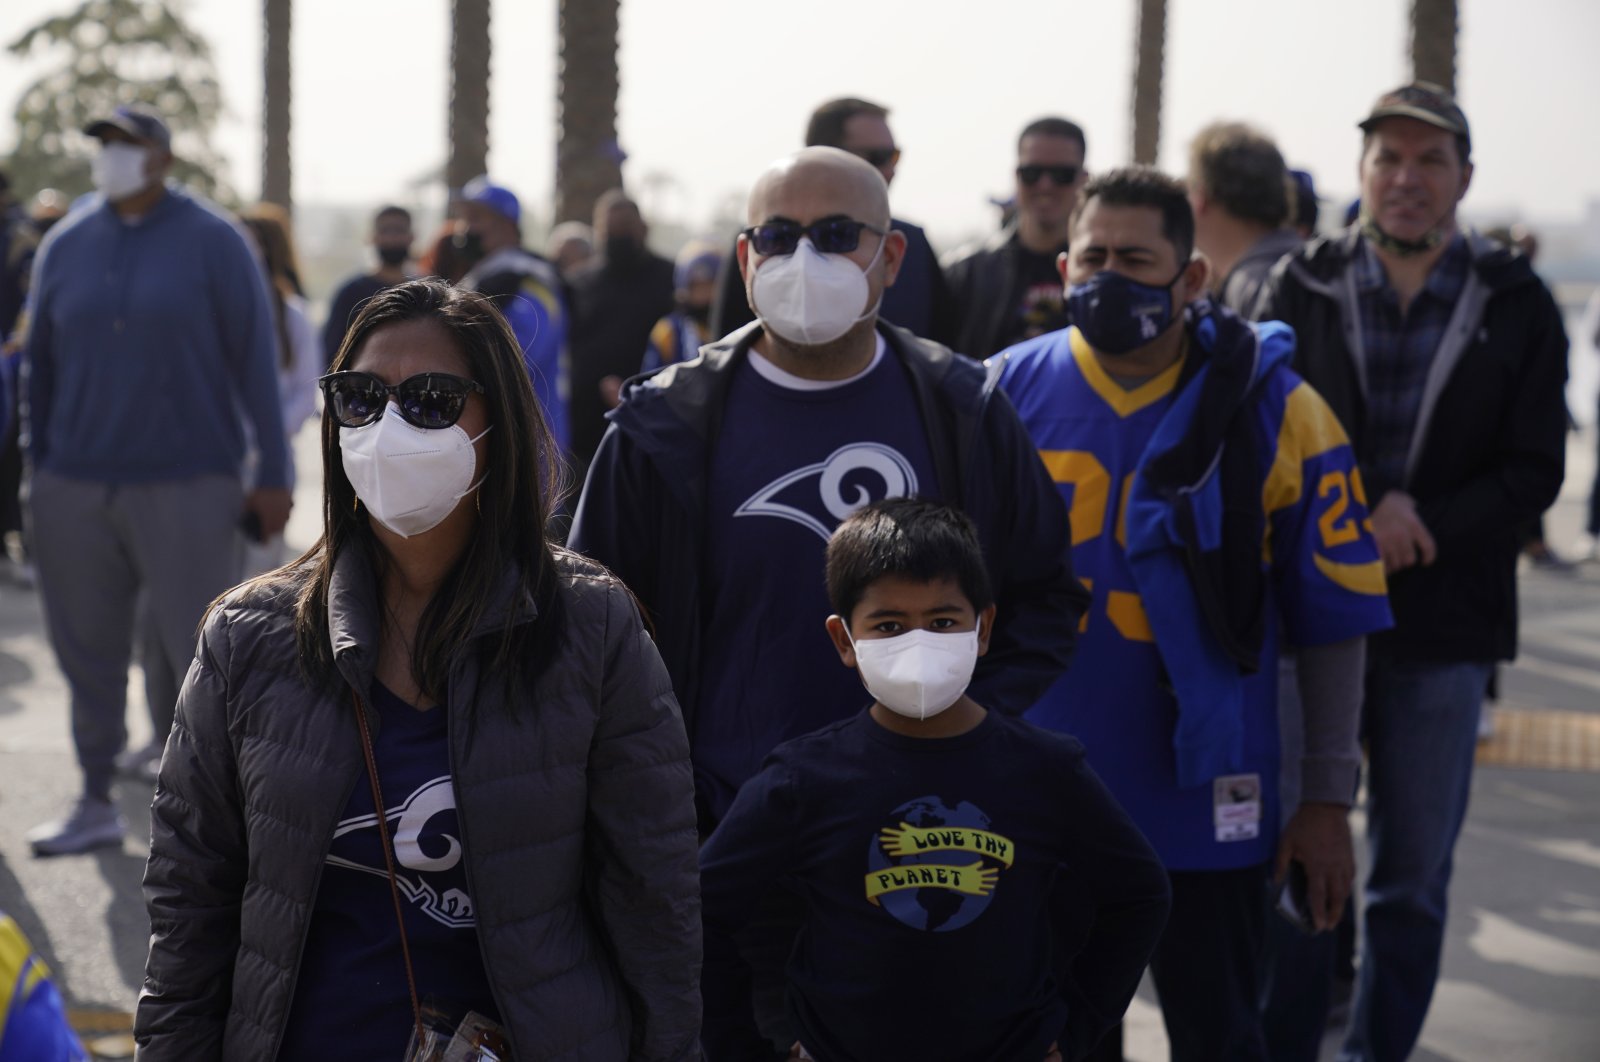 Fans wear masks amid the COVID-19 pandemic as they enter a stadium before an NFL game between the Los Angeles Rams and the Jacksonville Jaguars, California, U.S., Dec. 5, 2021. (AP Photo)